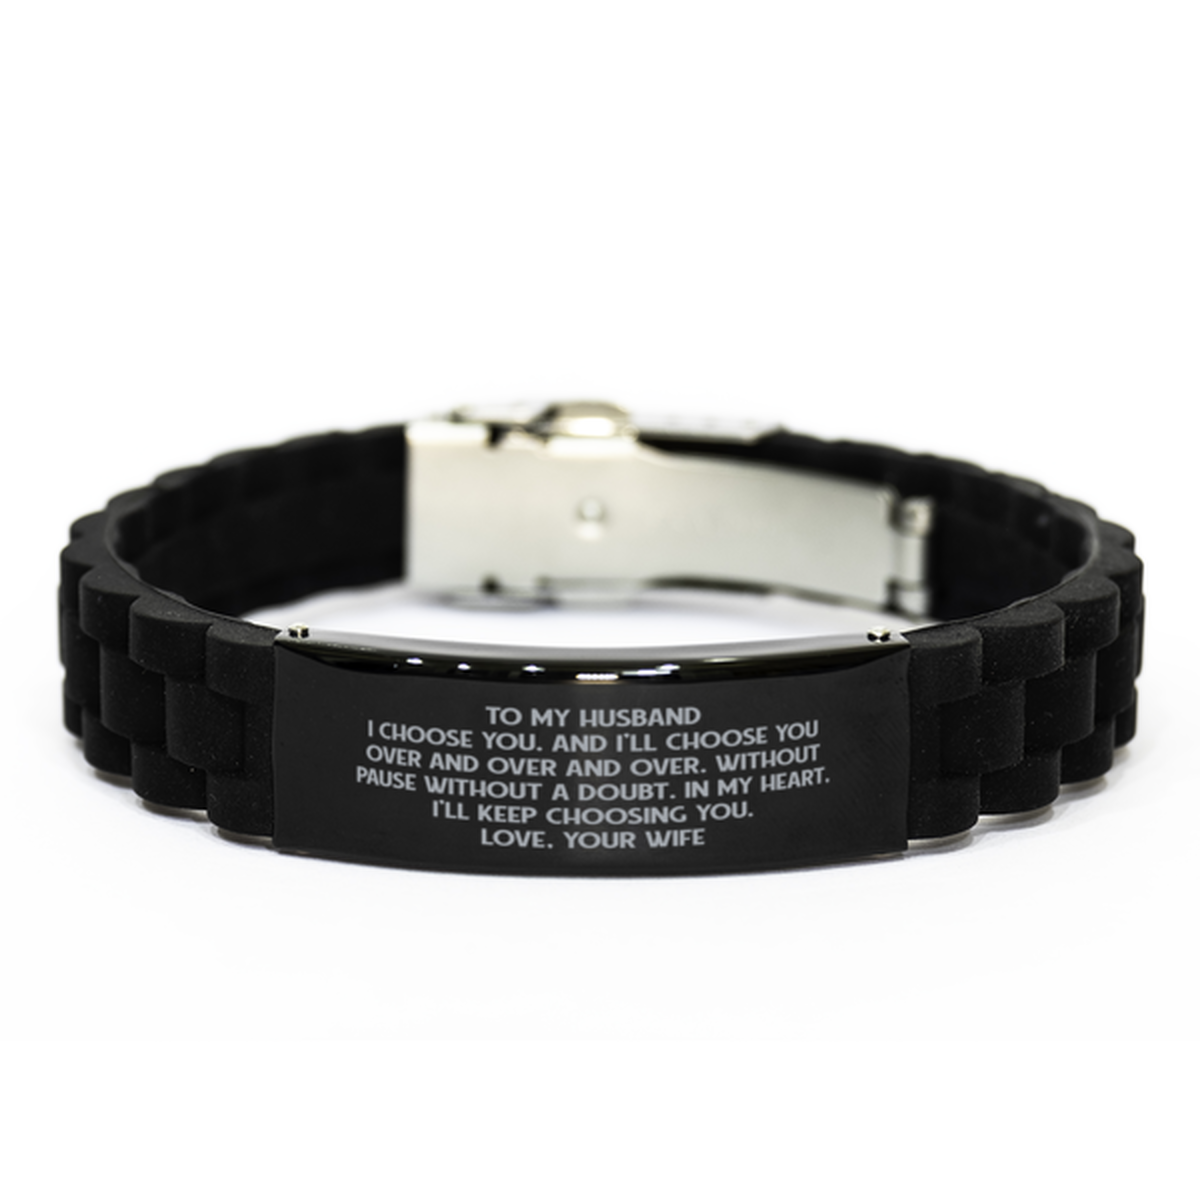 To My Husband Black Bracelet, I'll Keep Choosing You, Anniversary Gifts For Husband From Wife, Birthday Gifts For Men